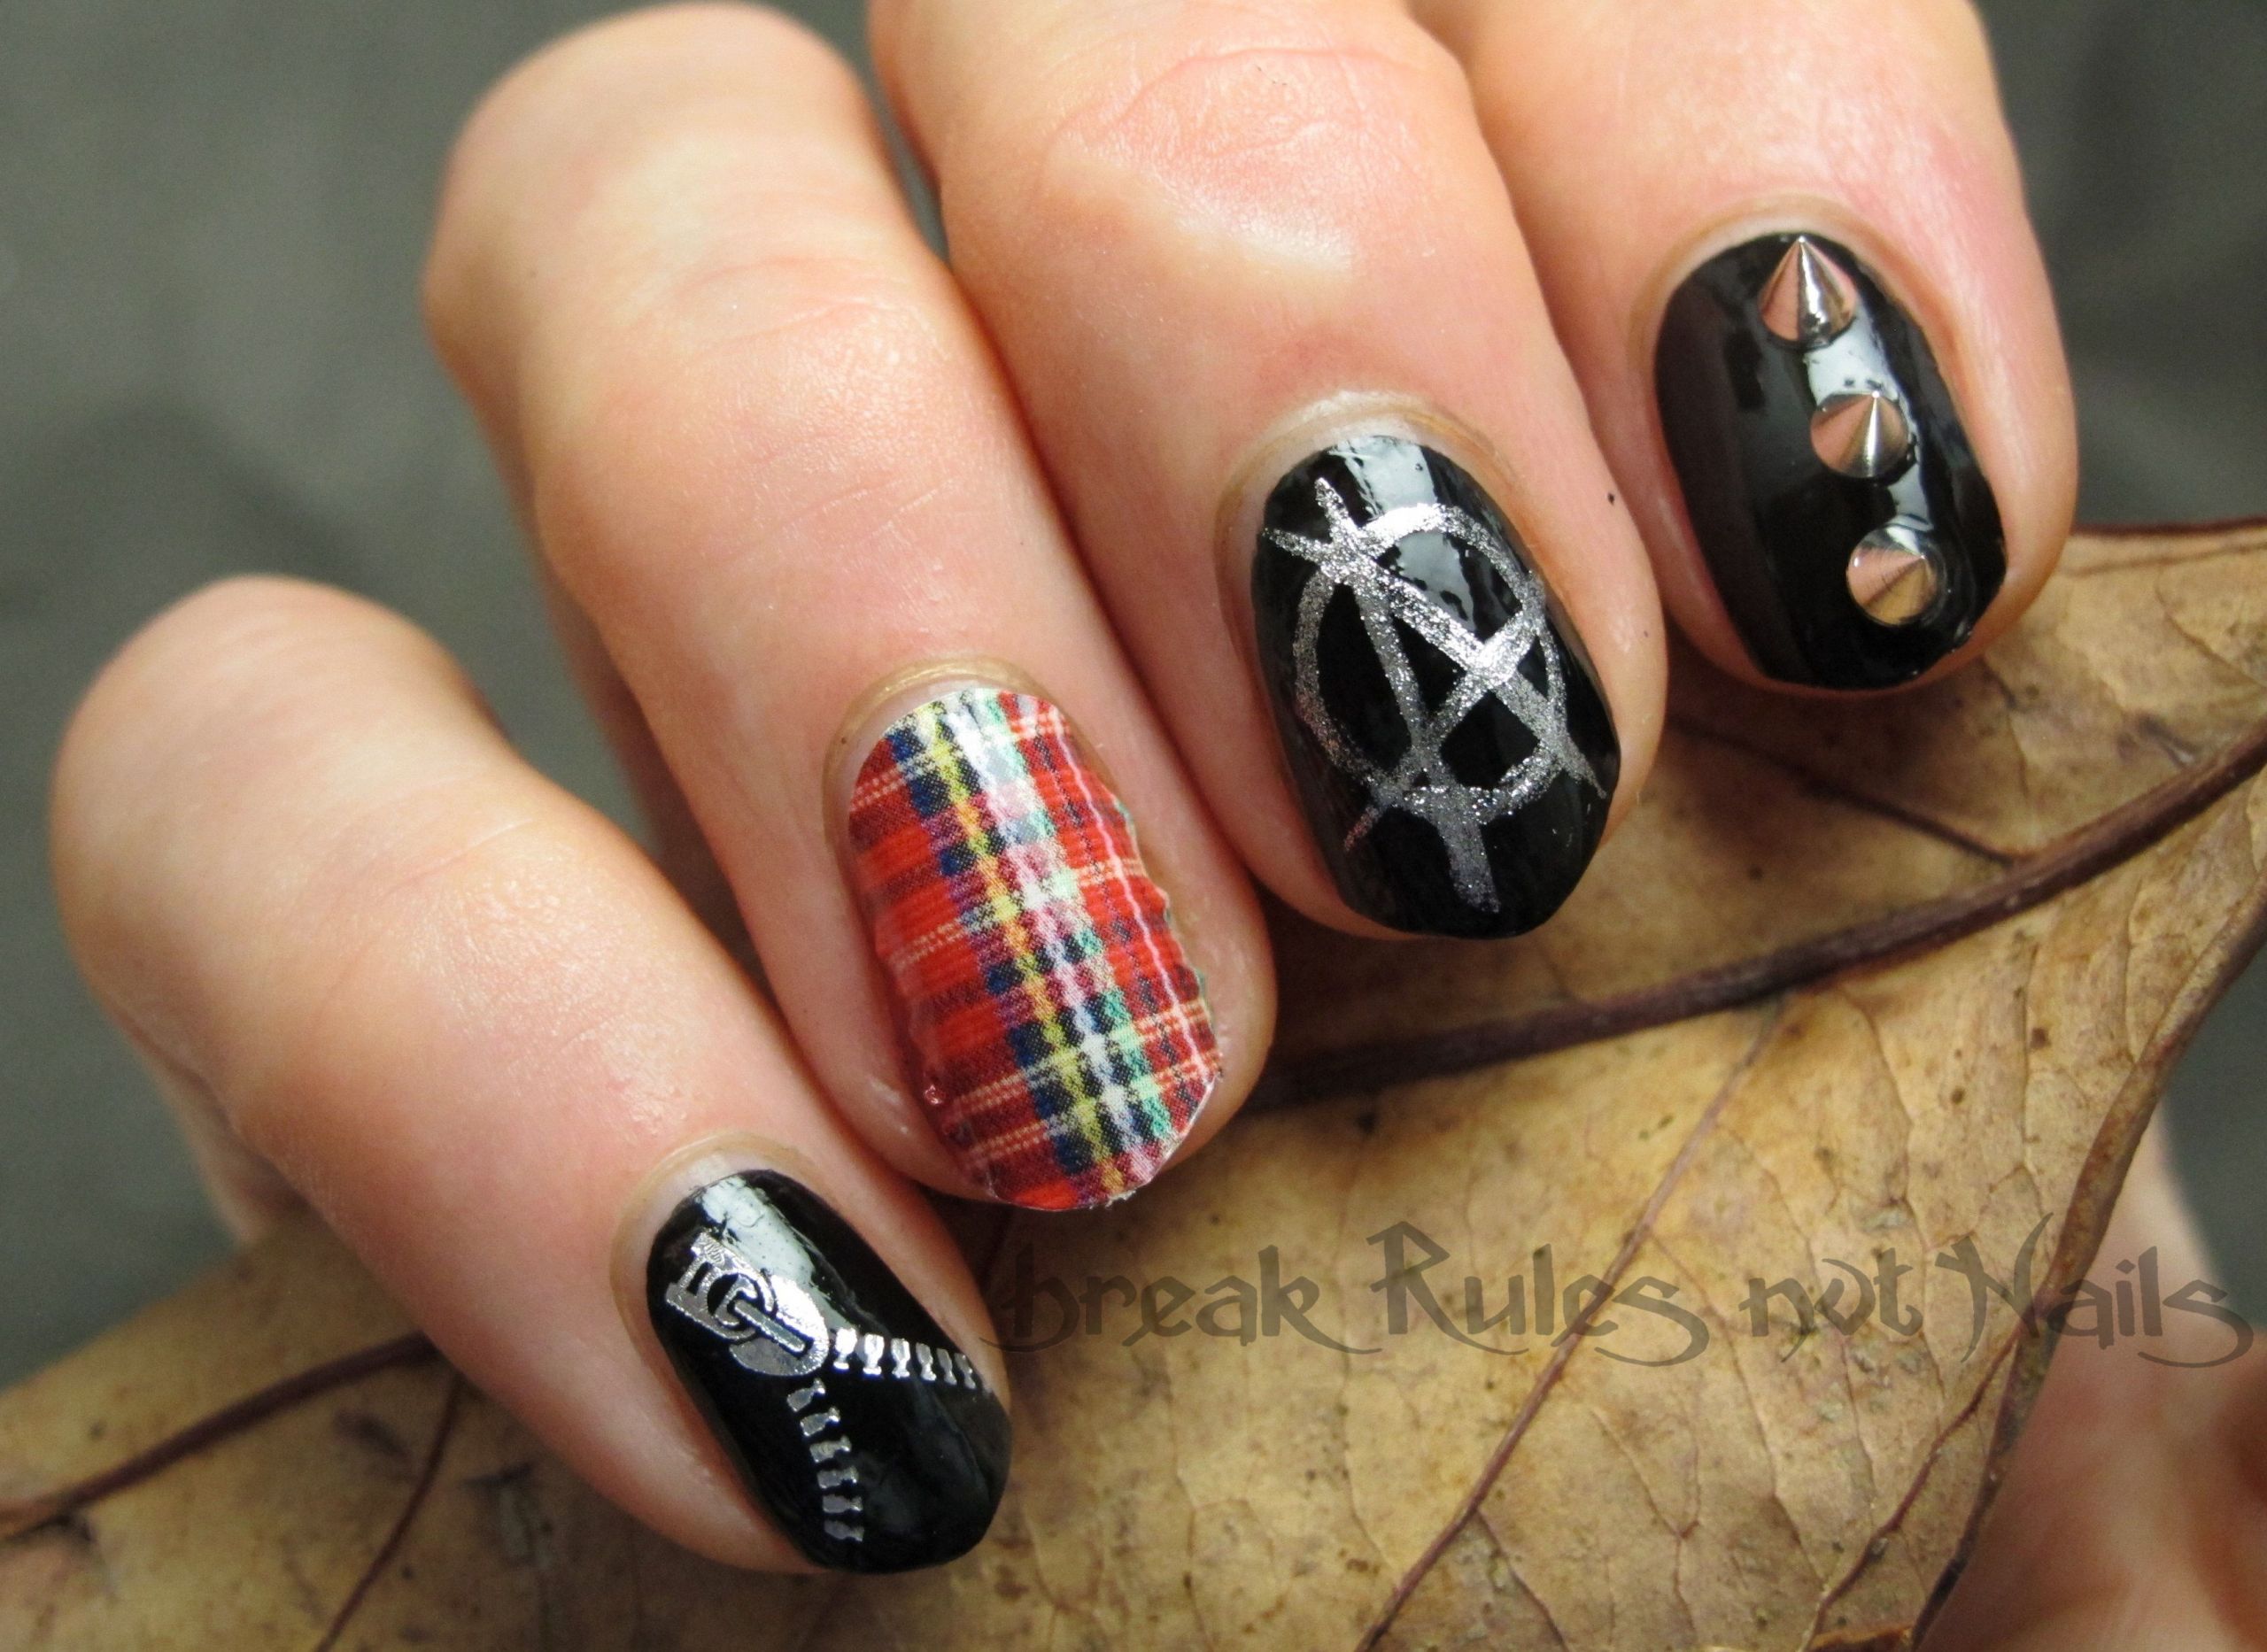 4. "Pop Punk Inspired Nails" - wide 8